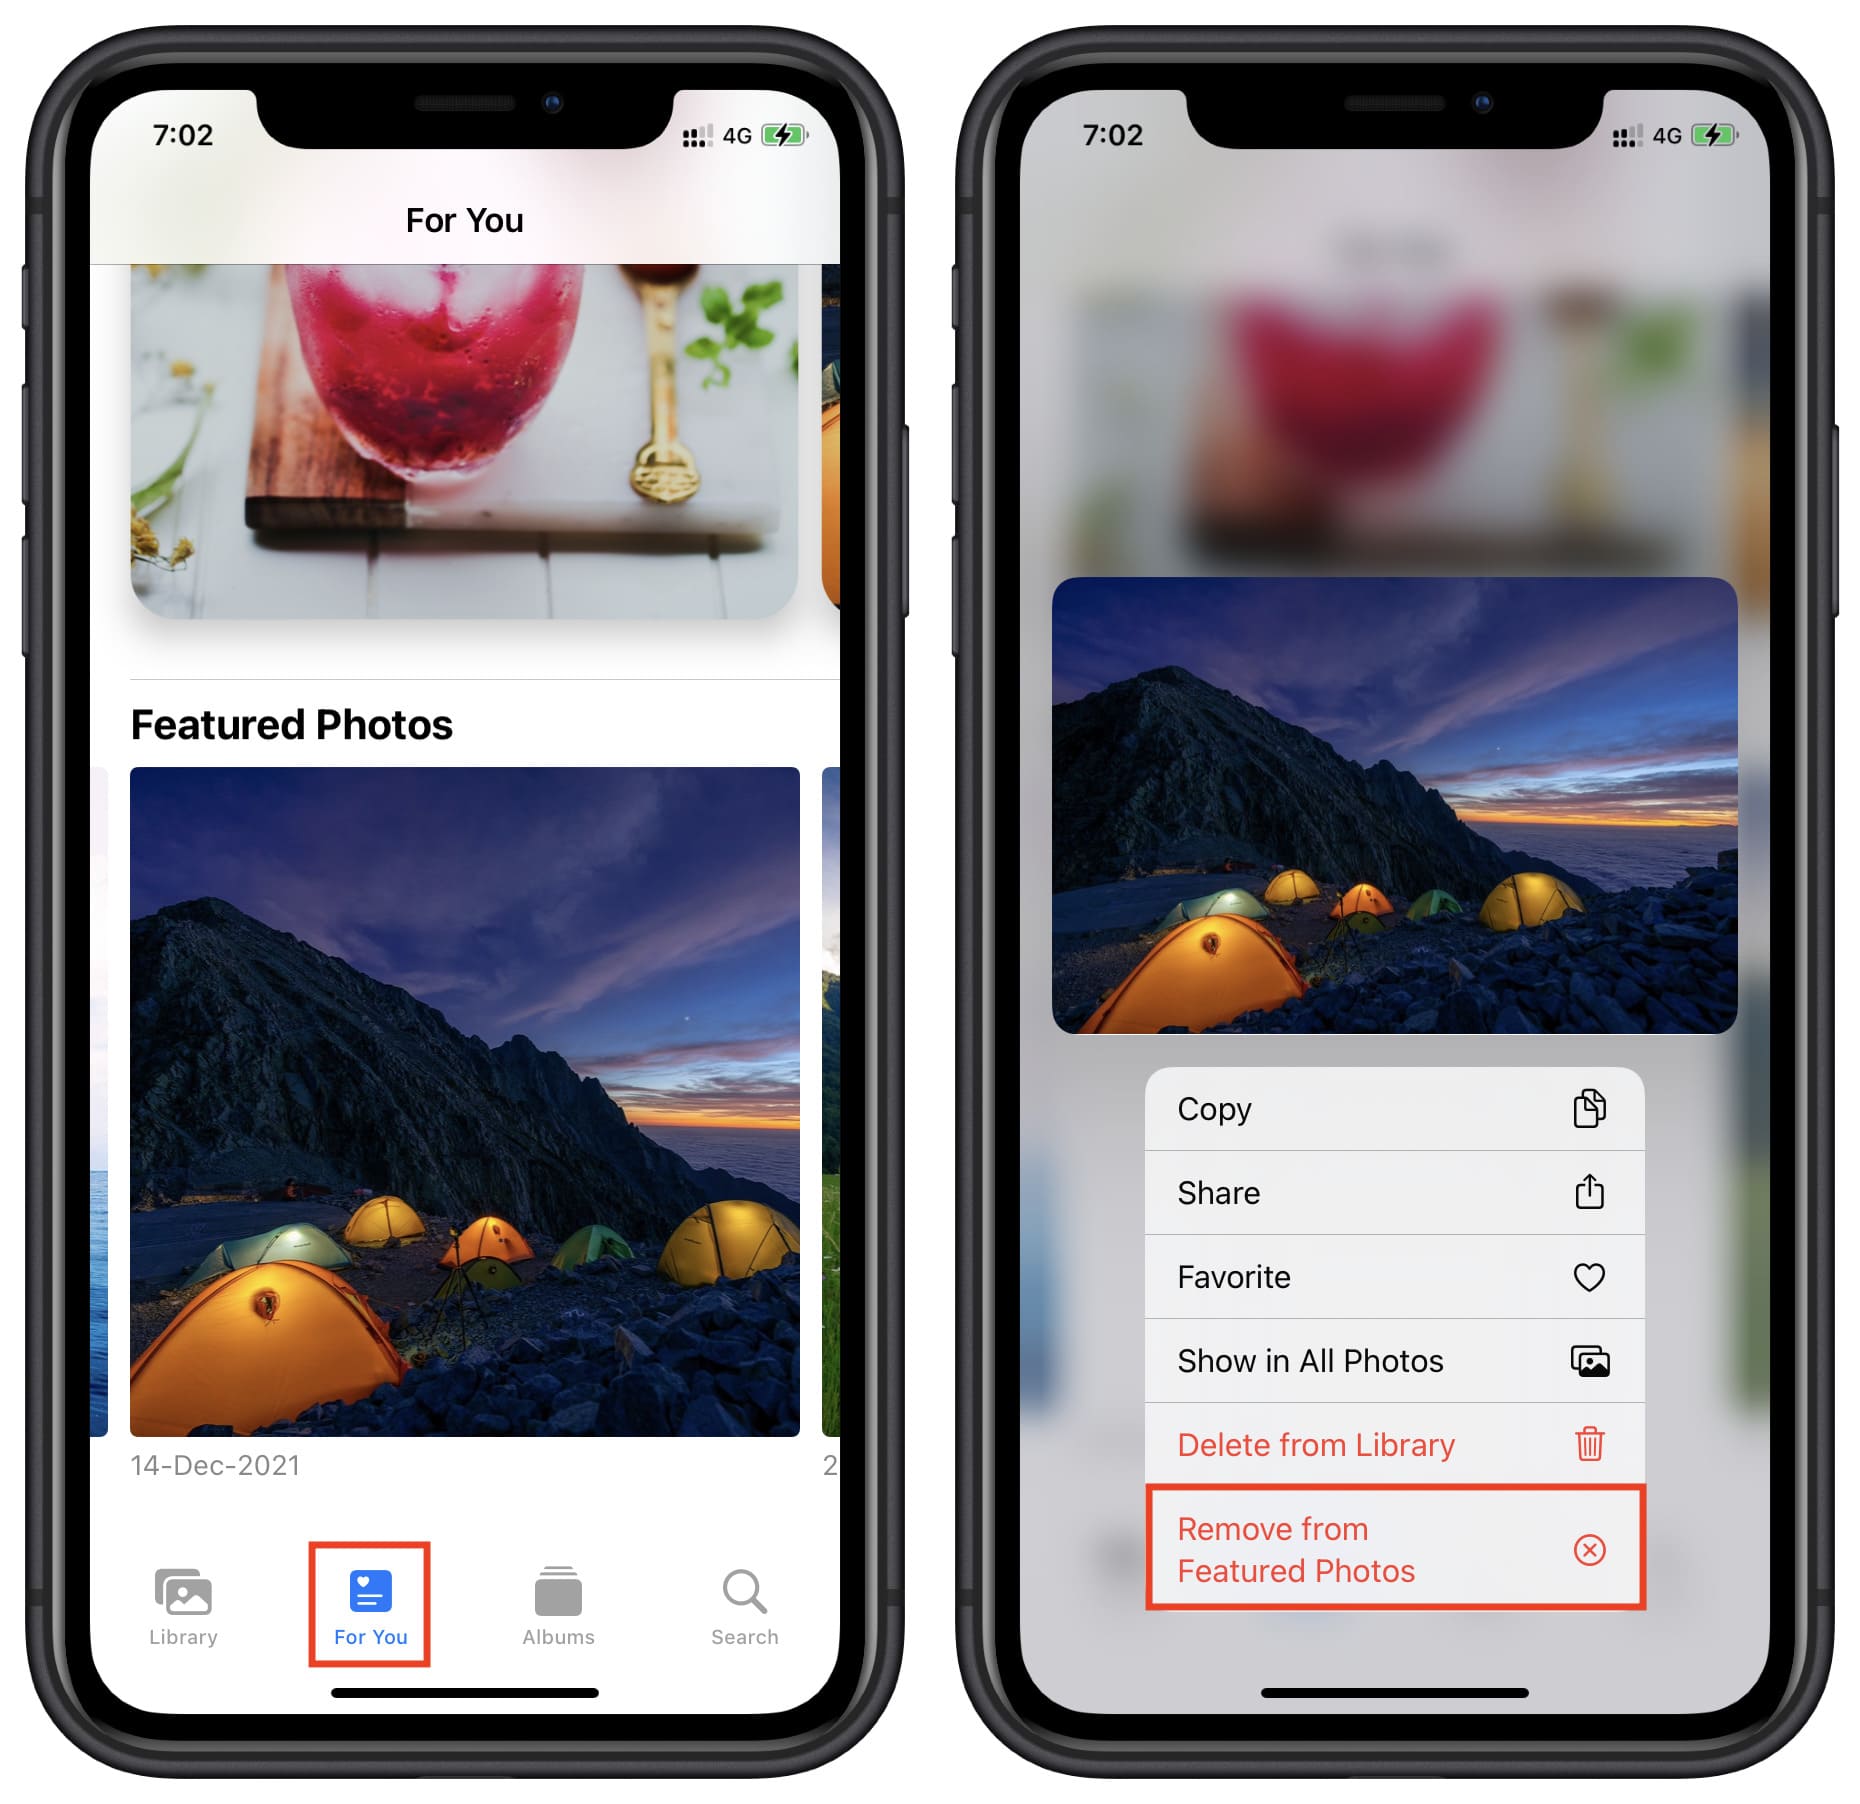 Remove from Featured Photos in iPhone Photos For You tab